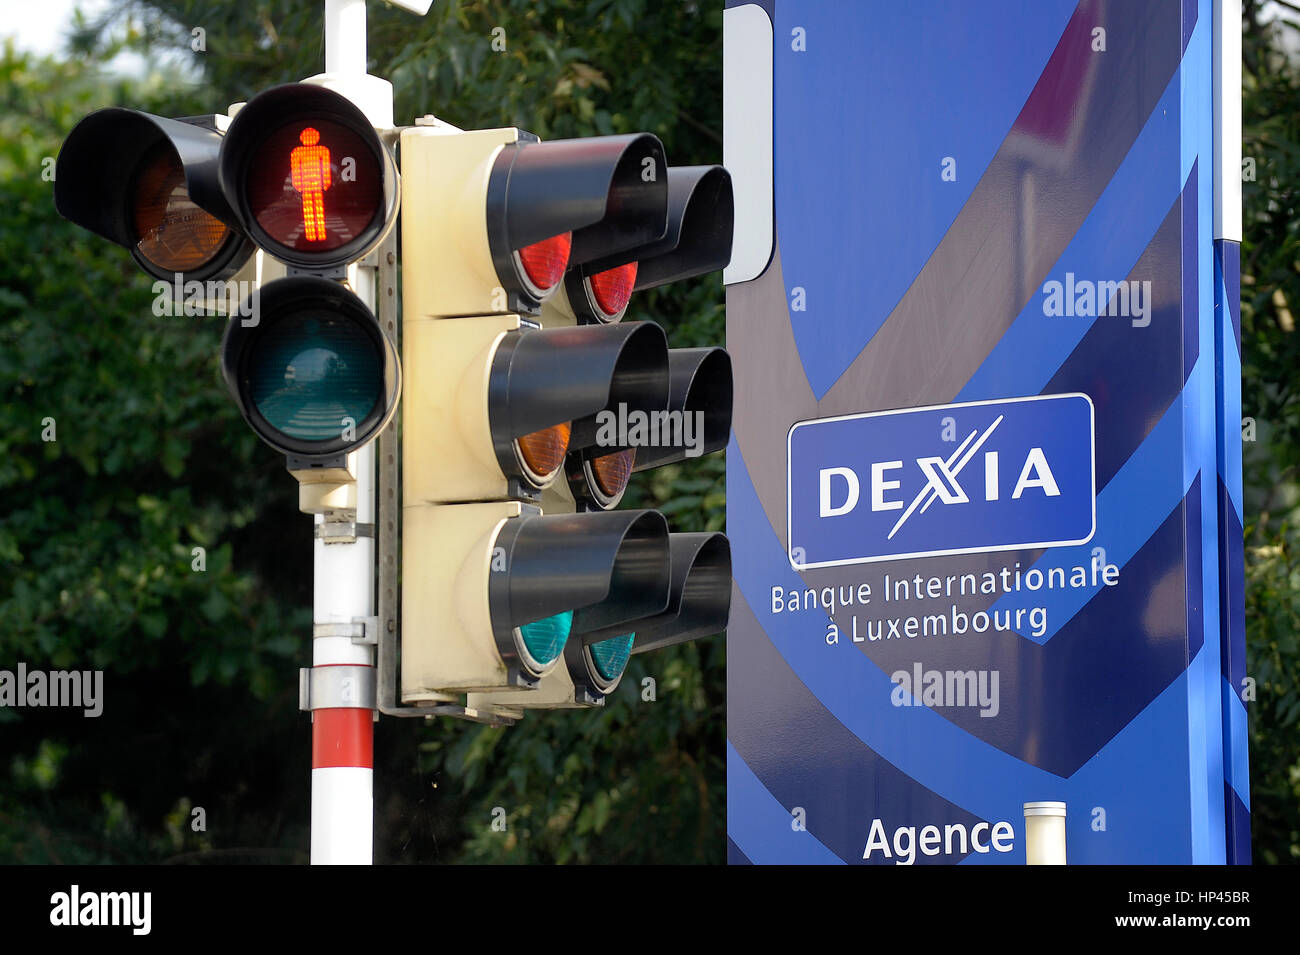 Dexia Luxembourg High Resolution Stock Photography and Images - Alamy